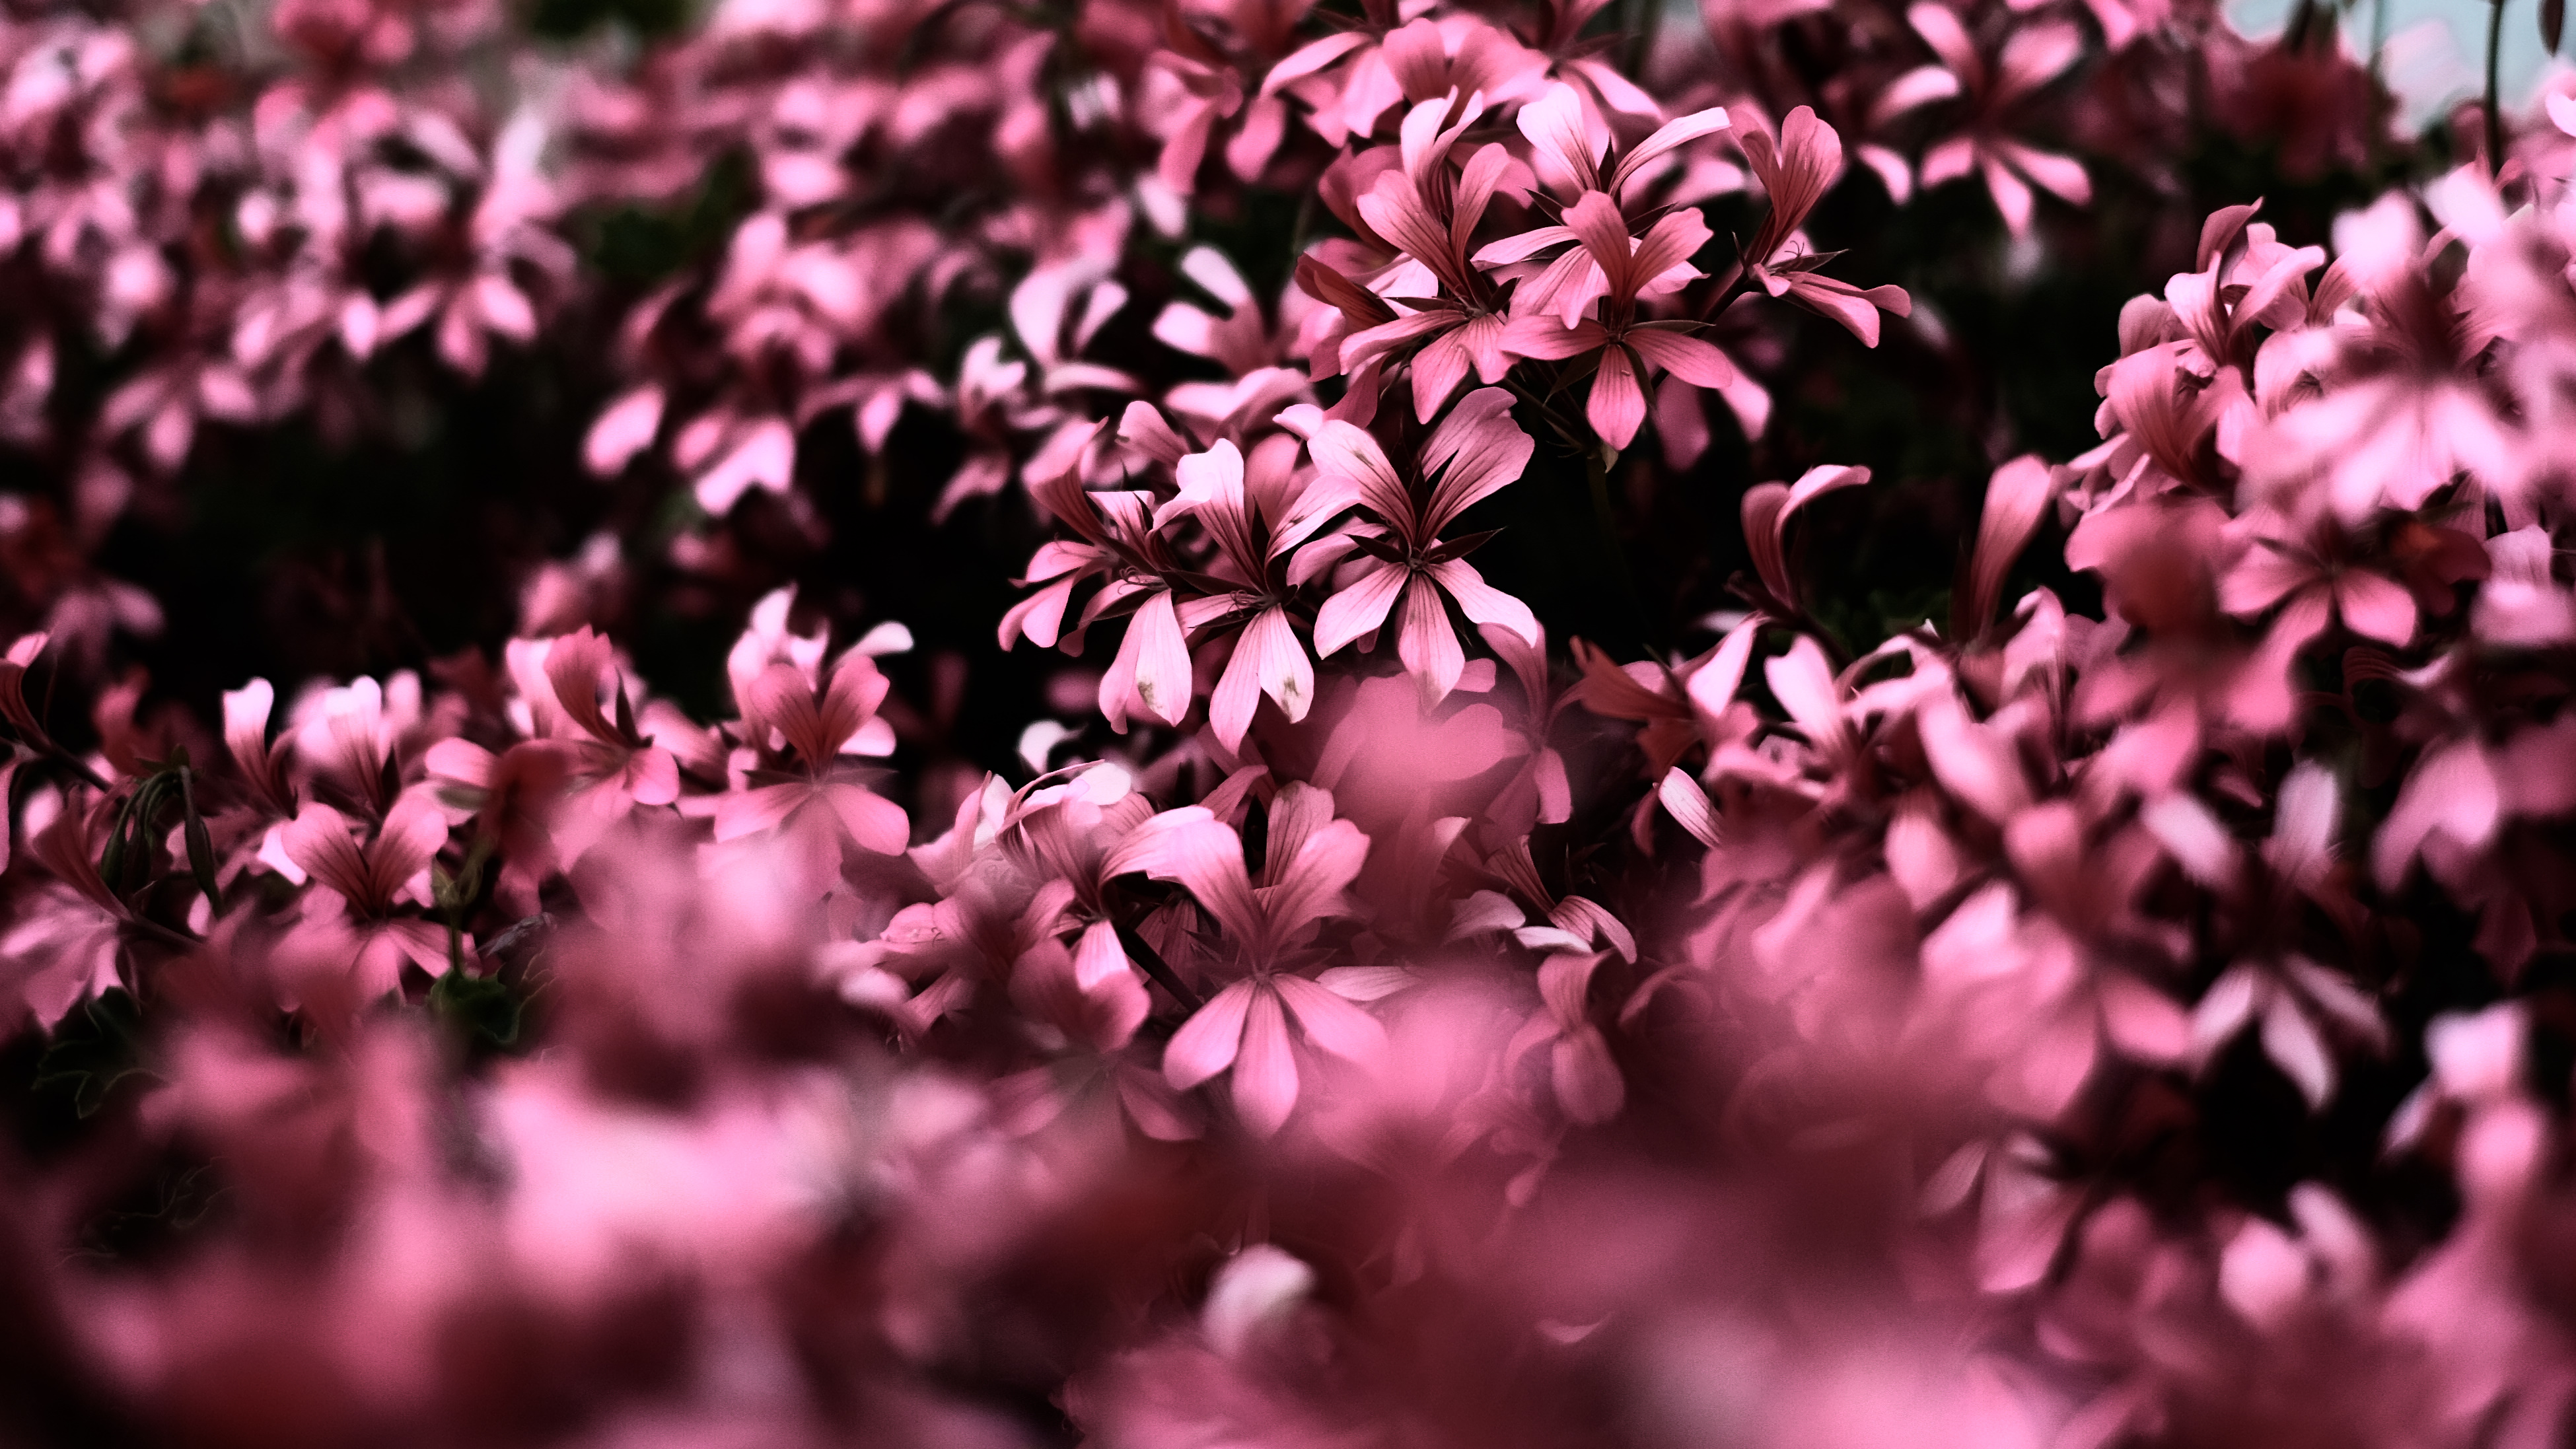 Pink Flowers Ultra Hd Blur 4k, HD Flowers, 4k Wallpapers, Images, Backgrounds, Photos and Pictures